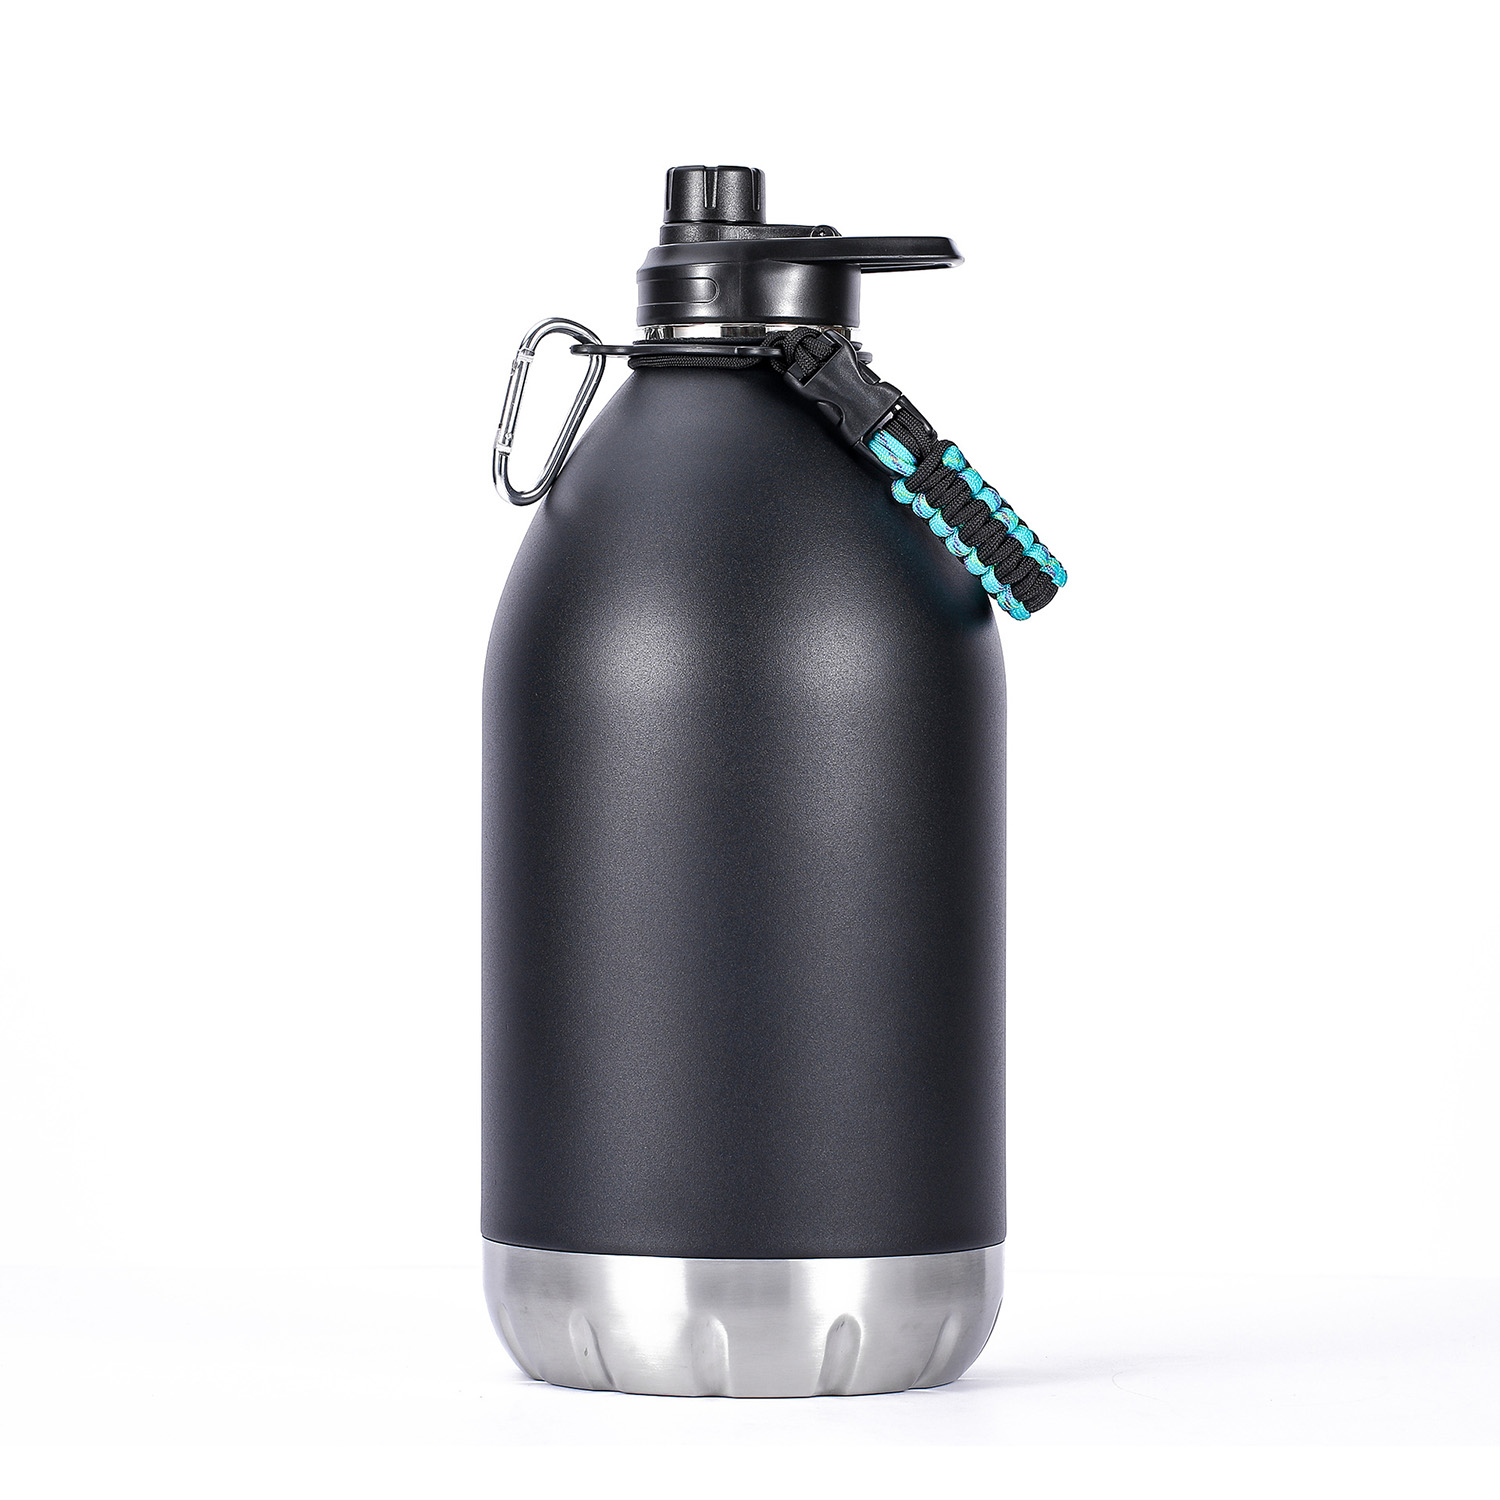 https://www.waterbottle.tech/wp-content/uploads/2021/11/large-capacity-water-bottle-1-gallon-3.8-liter-stainless-steel-insulated-growler-flask-s1112800-1.jpg